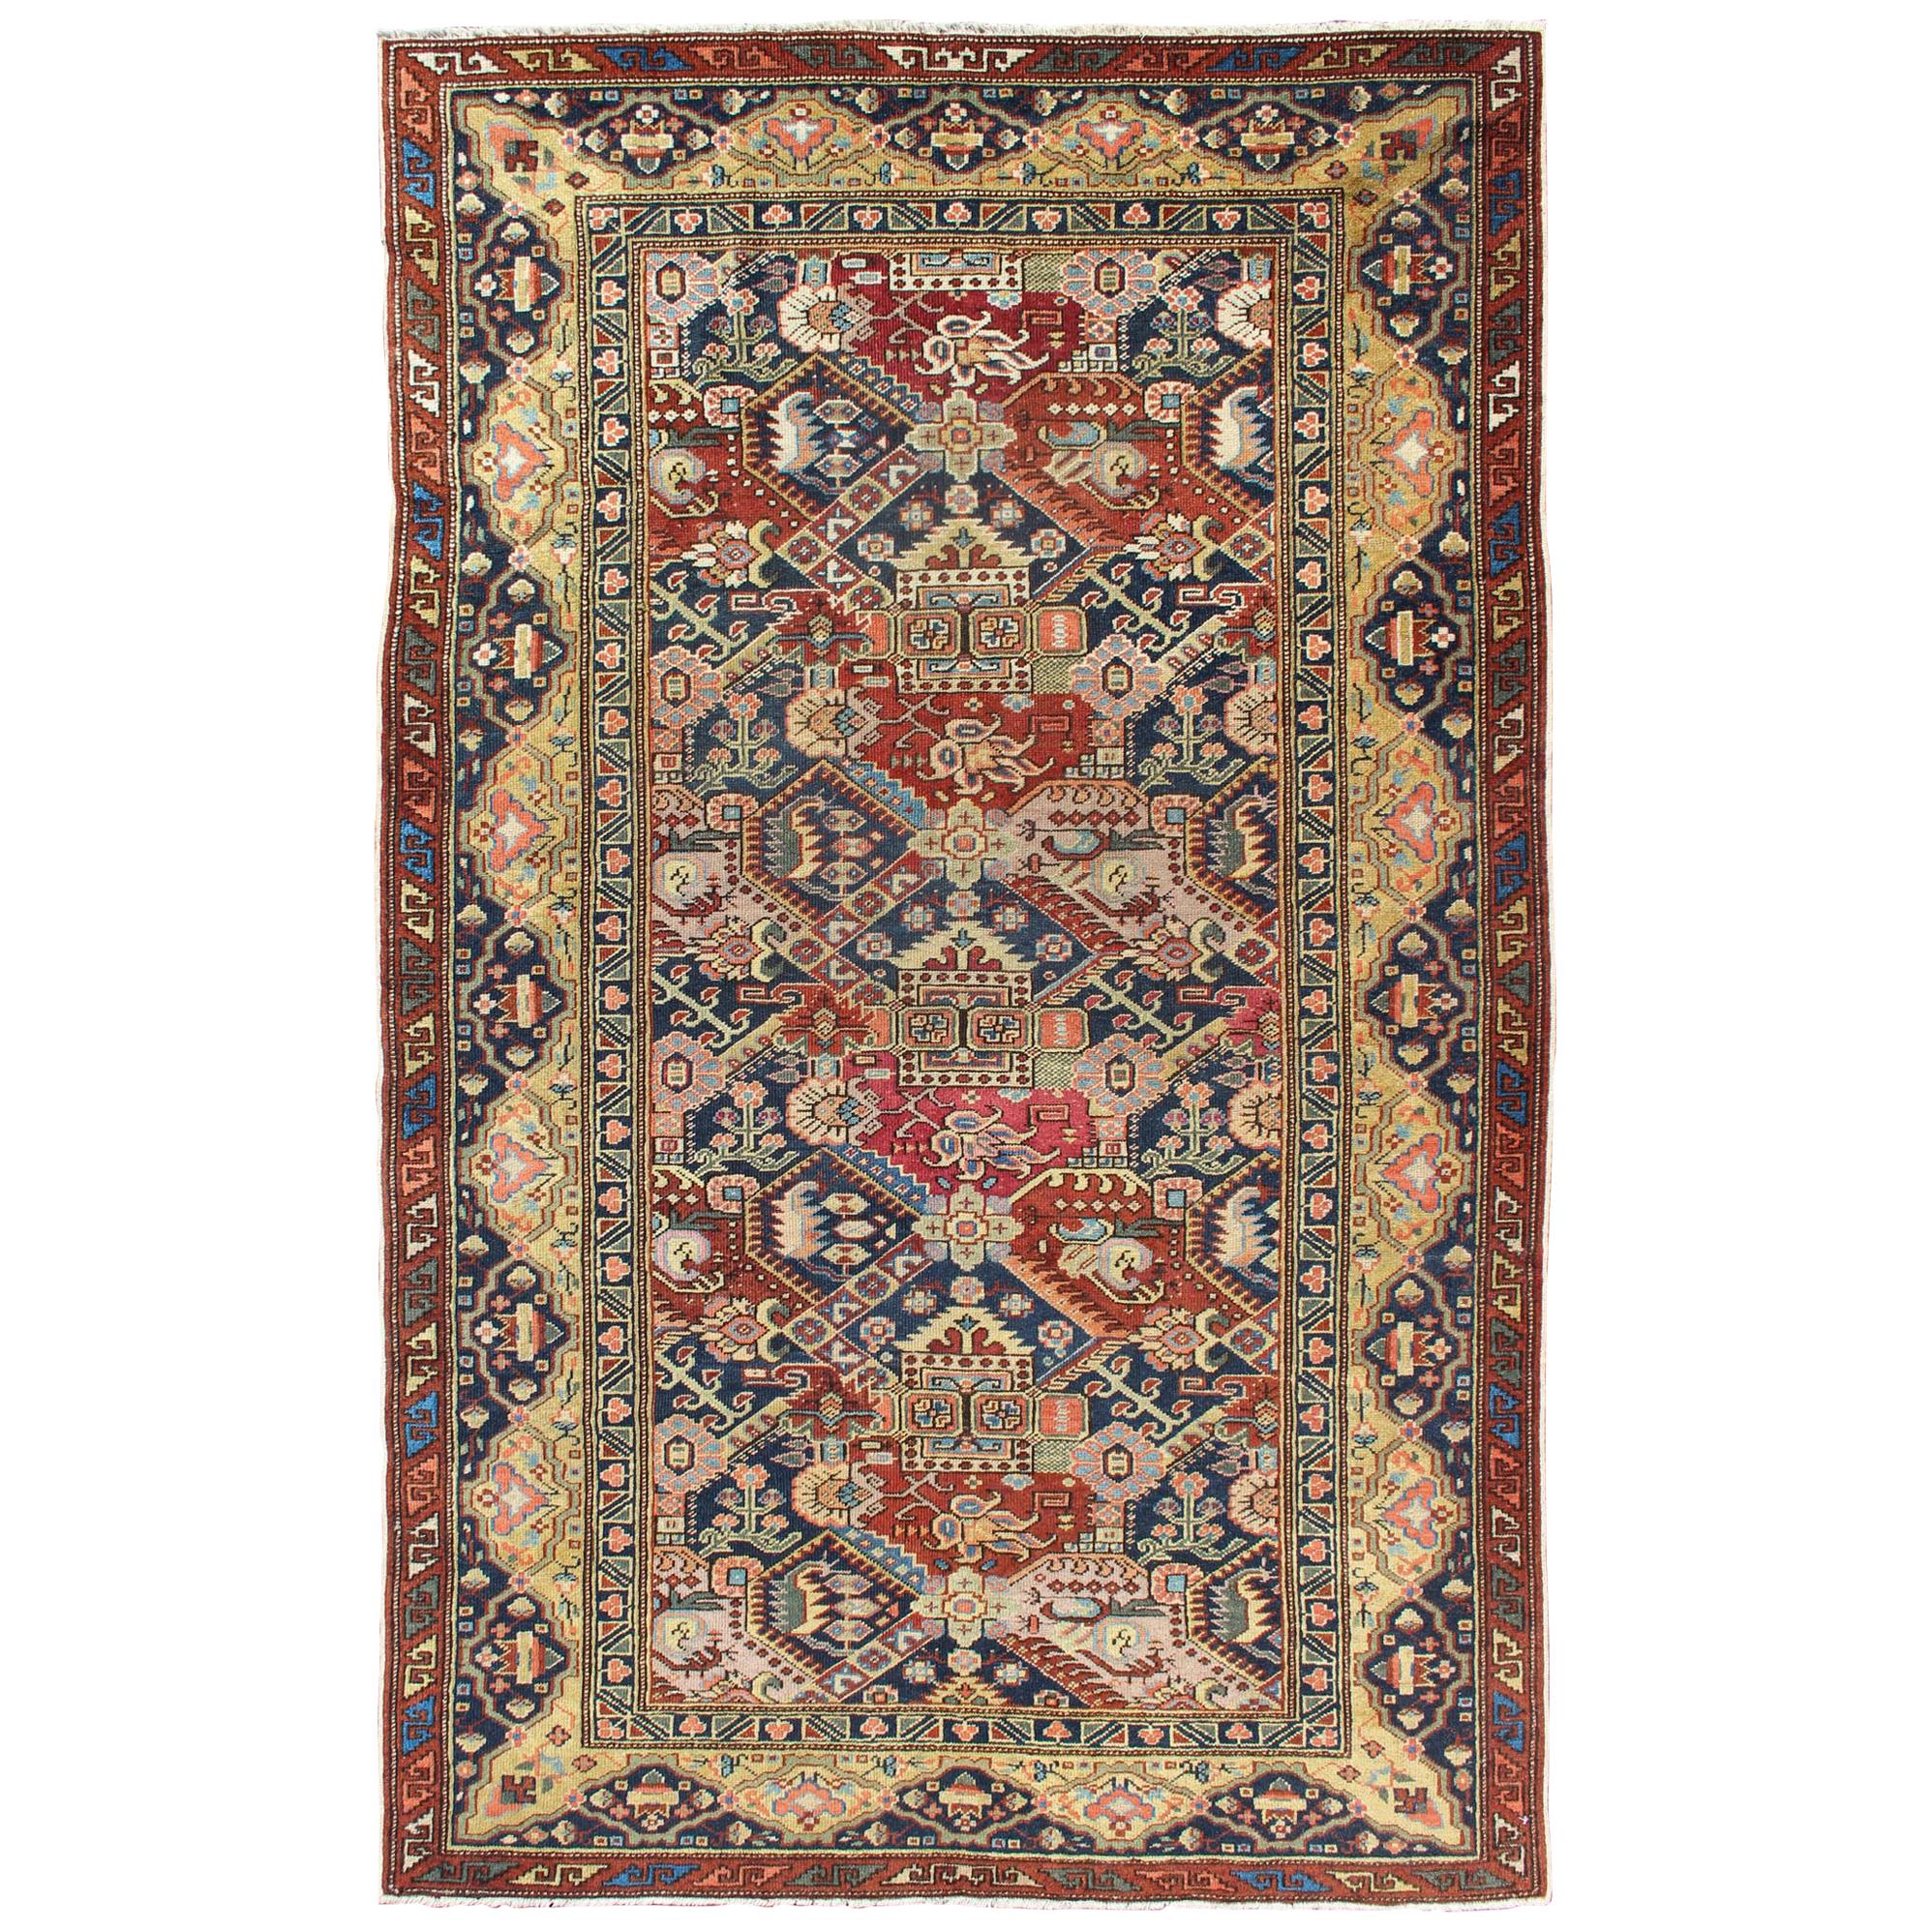 19th Century Exquisite Antique Caucasian Seychour Rug In Red's And Blue's For Sale